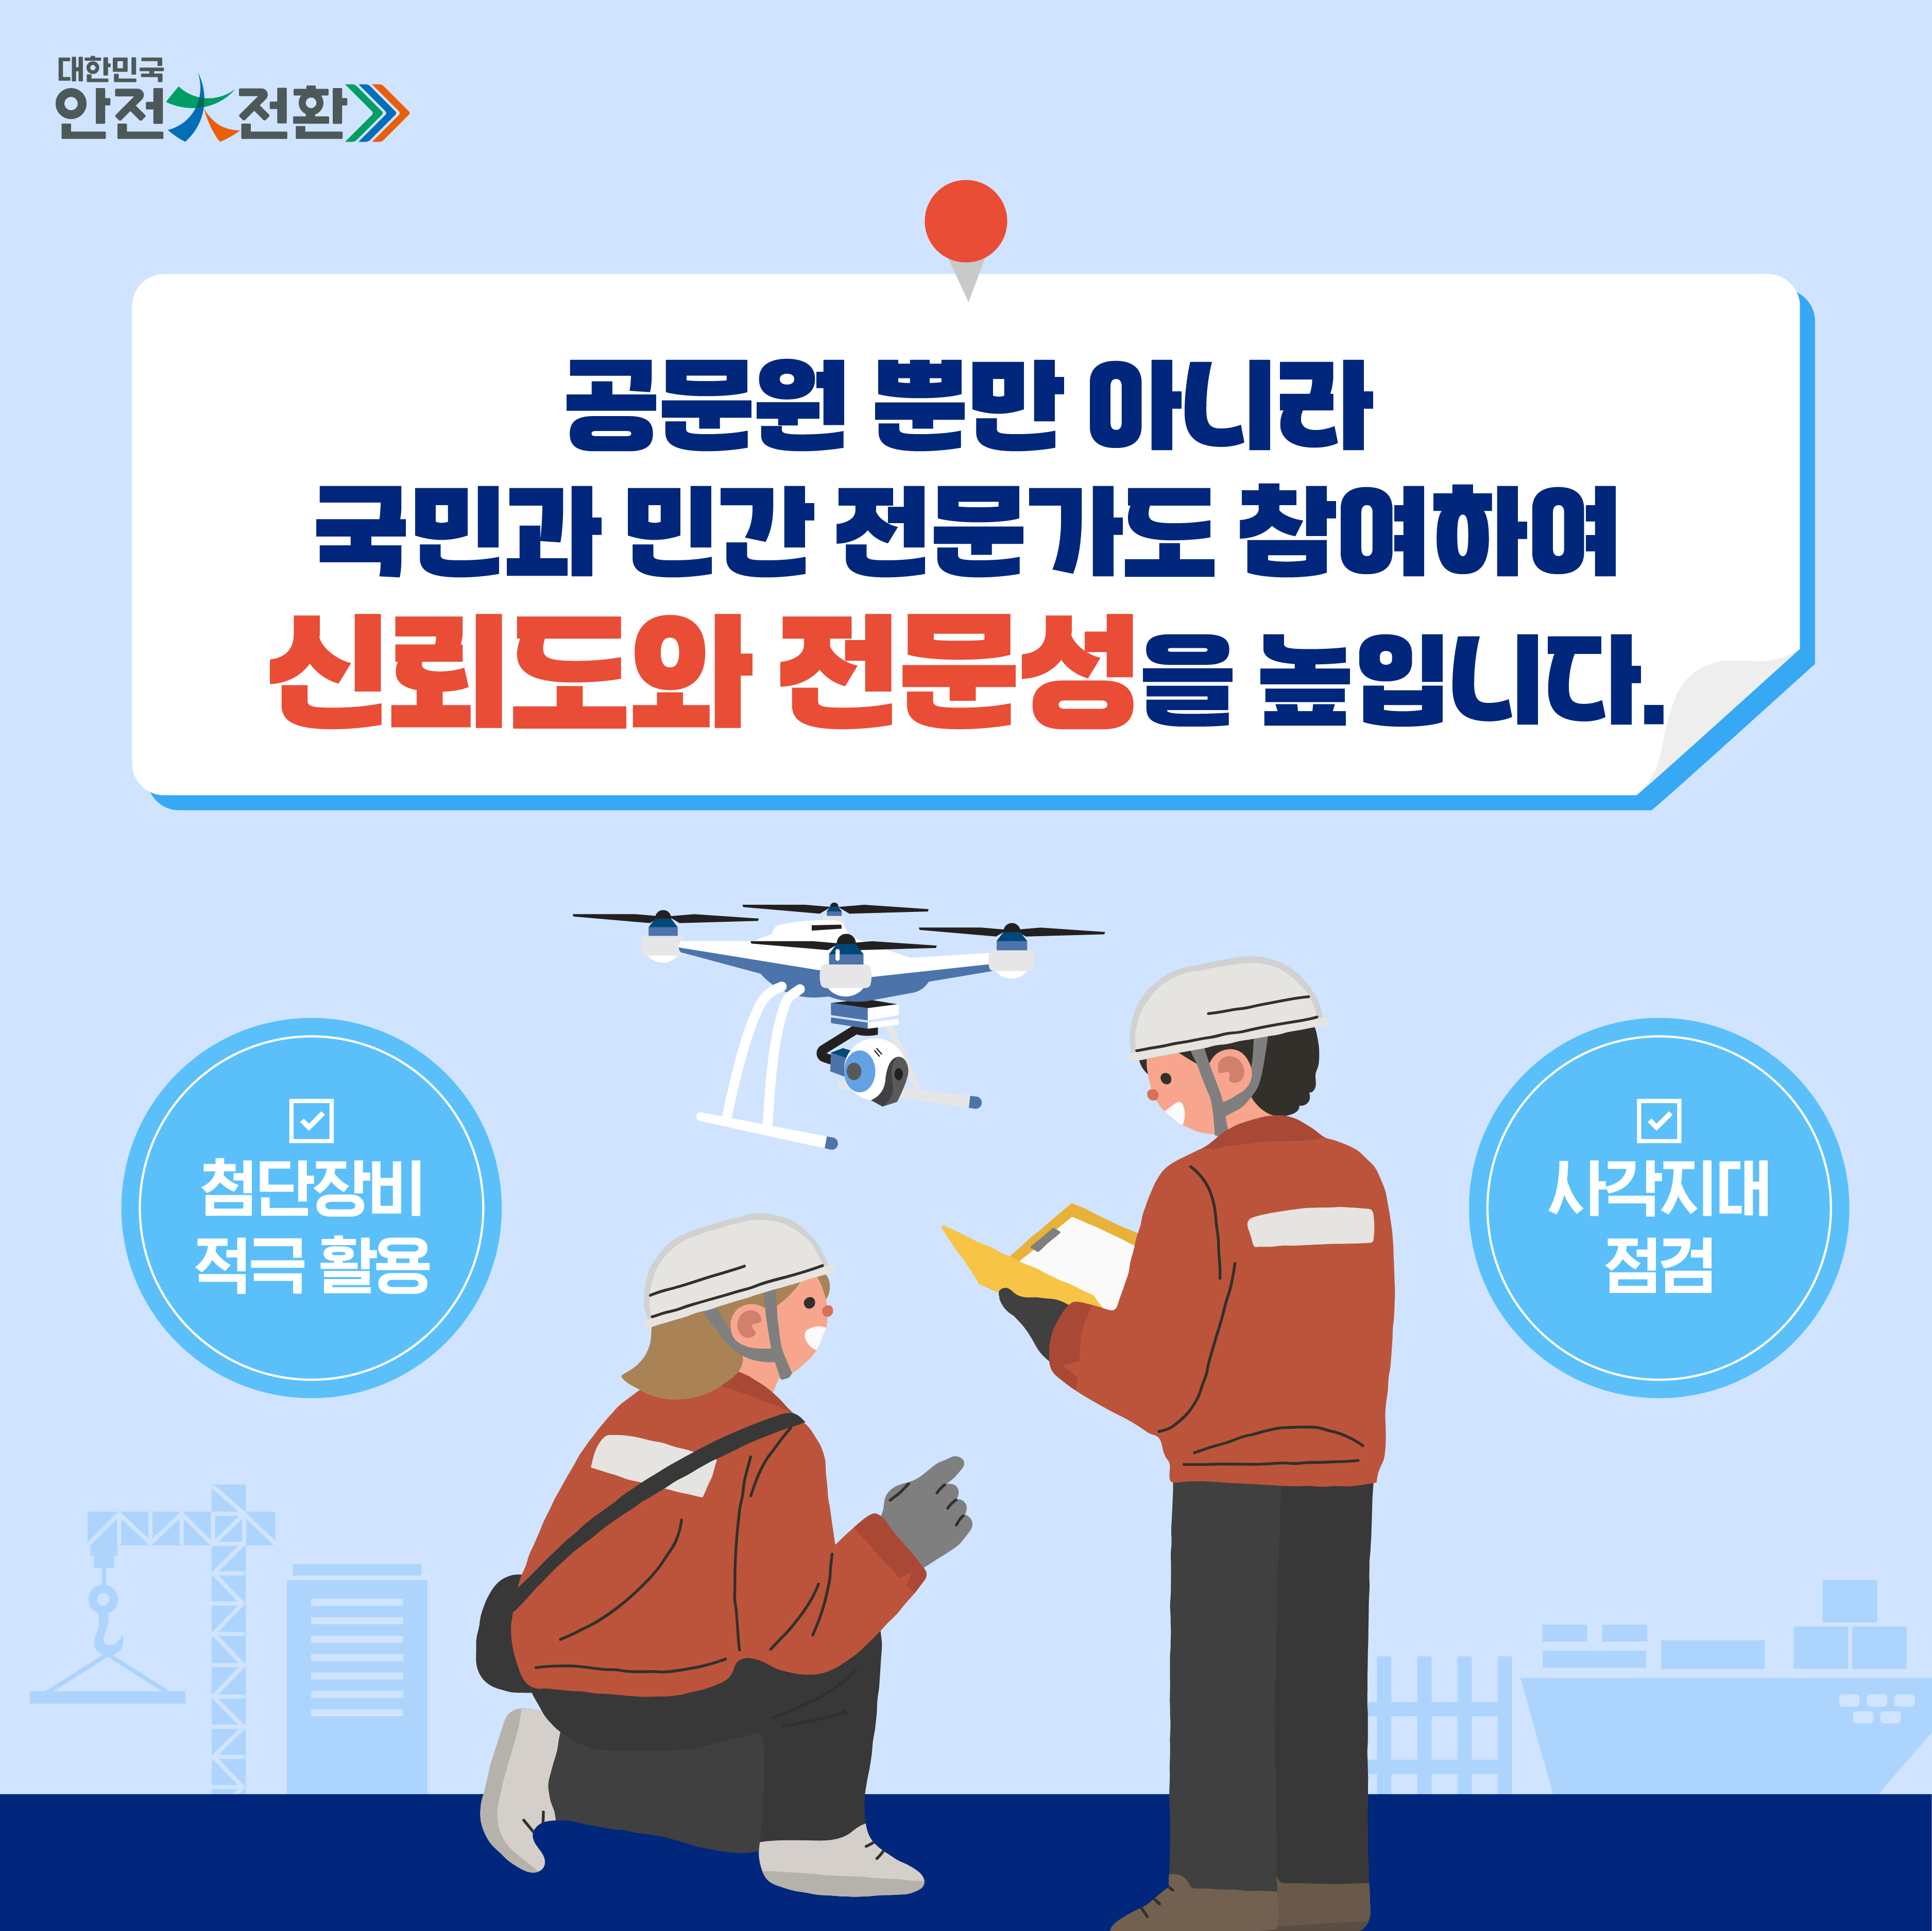 https://www.komsa.or.kr/kor/;jsessionid=A4A6BF7F719EE4BCD6C7C51A308FEA21